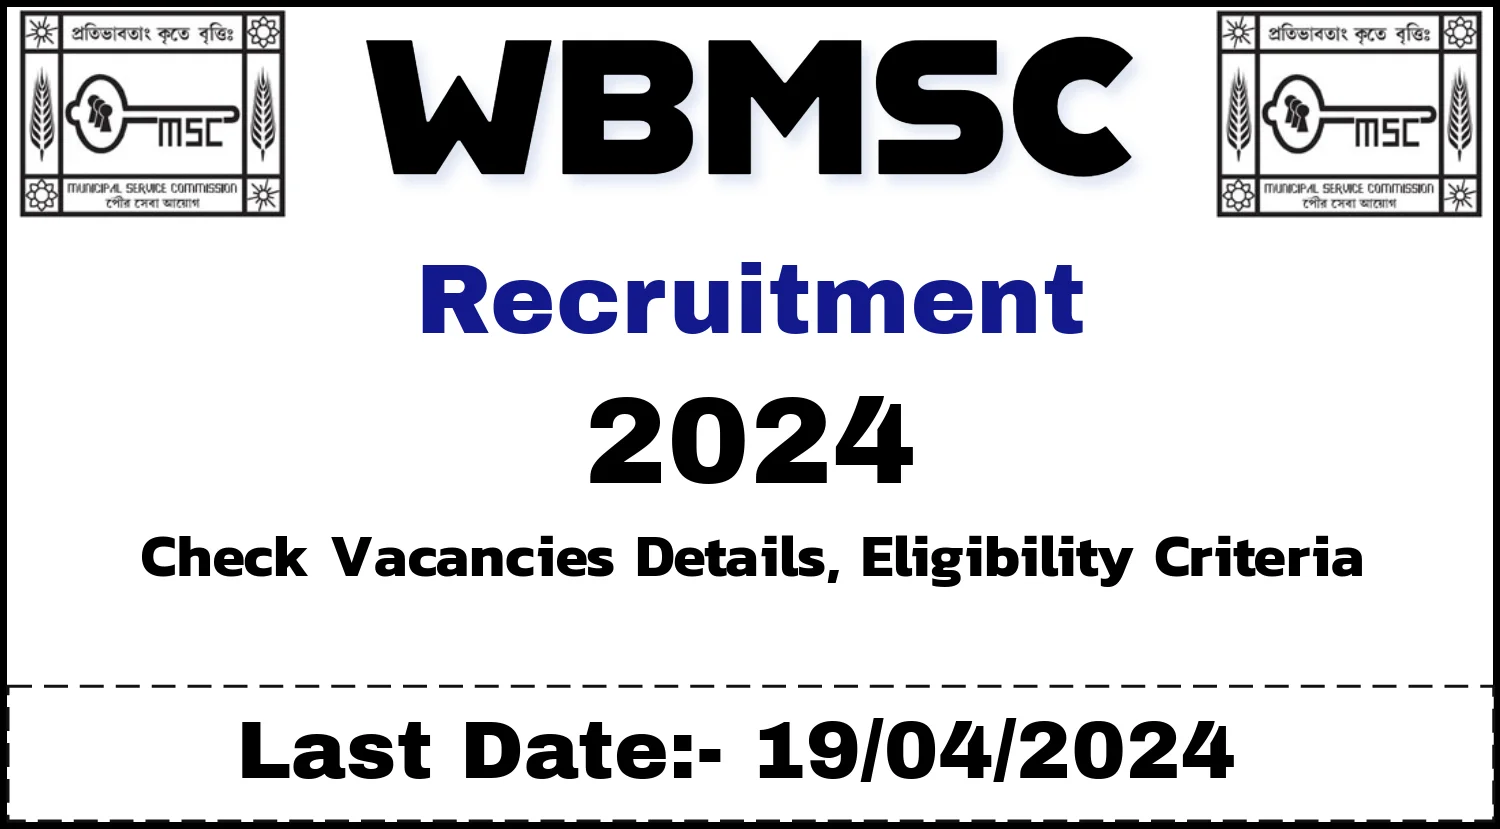 WBMSC Recruitment 2024 Under Municipality All Over the West Bengal